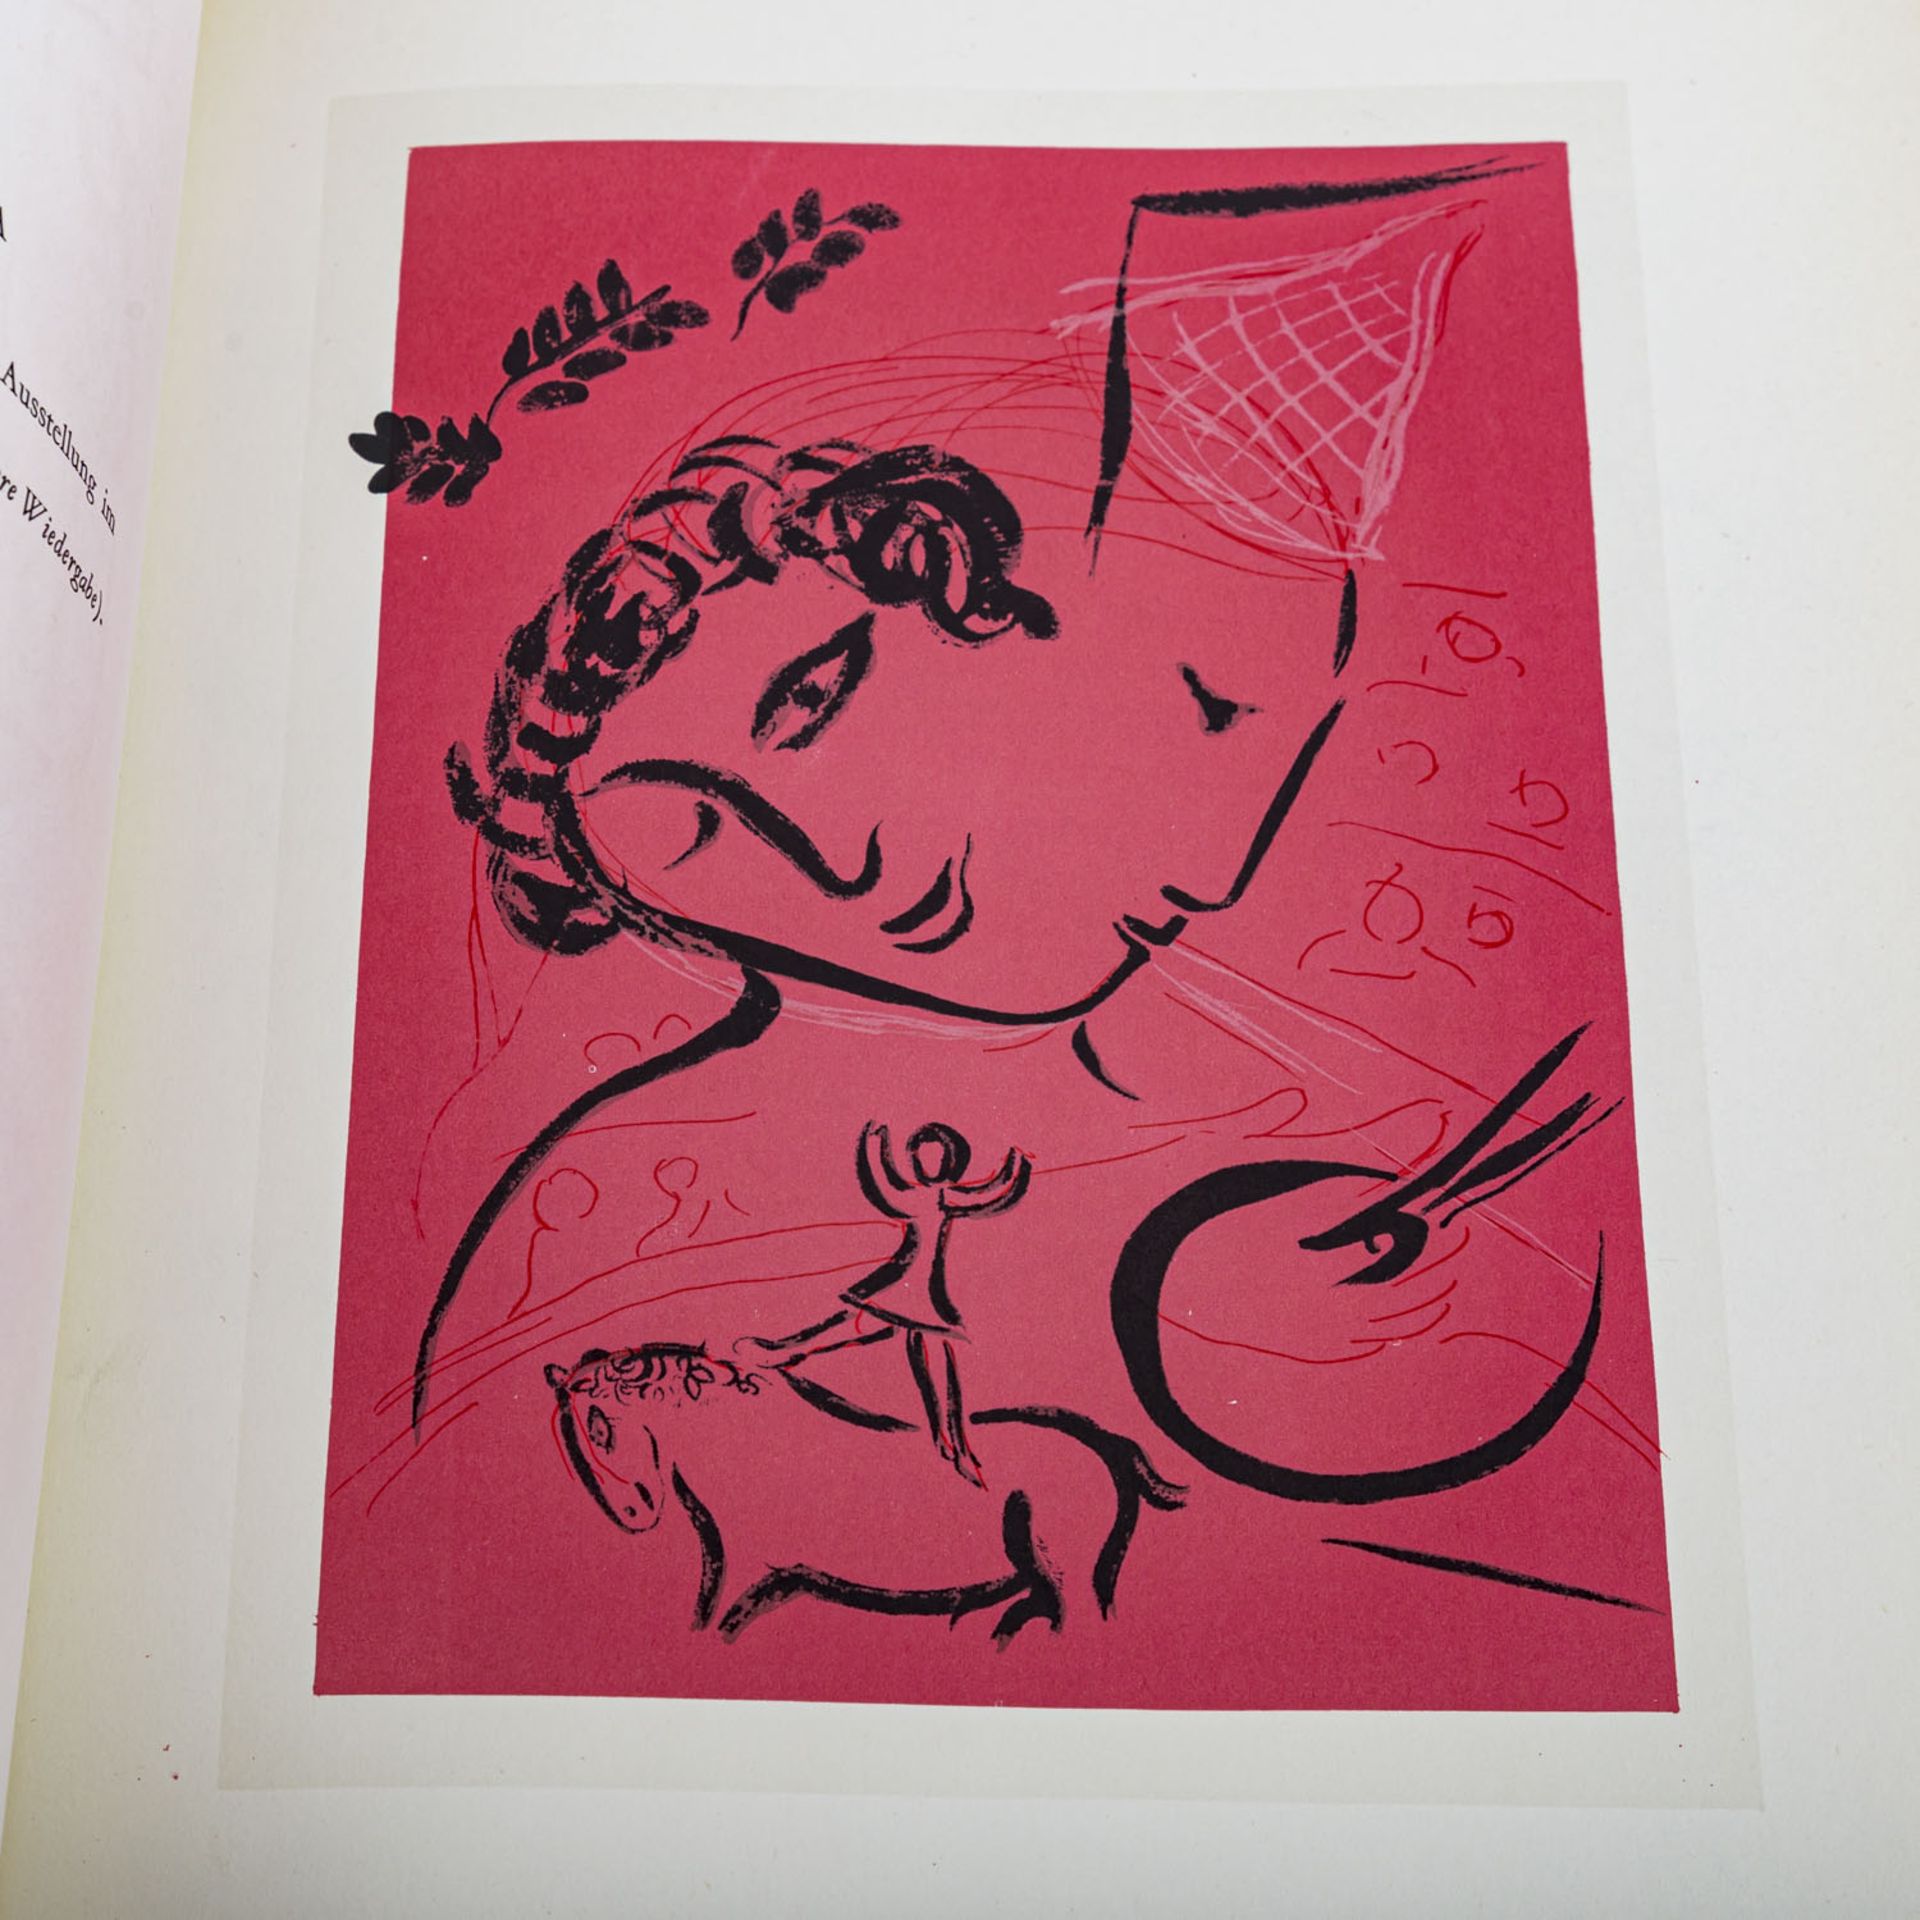 MOURLOT, FERNAND, Chagall, Lithograph II 1957-1962,Monte Carlo: André Sauret 1963. Mit - Image 4 of 4